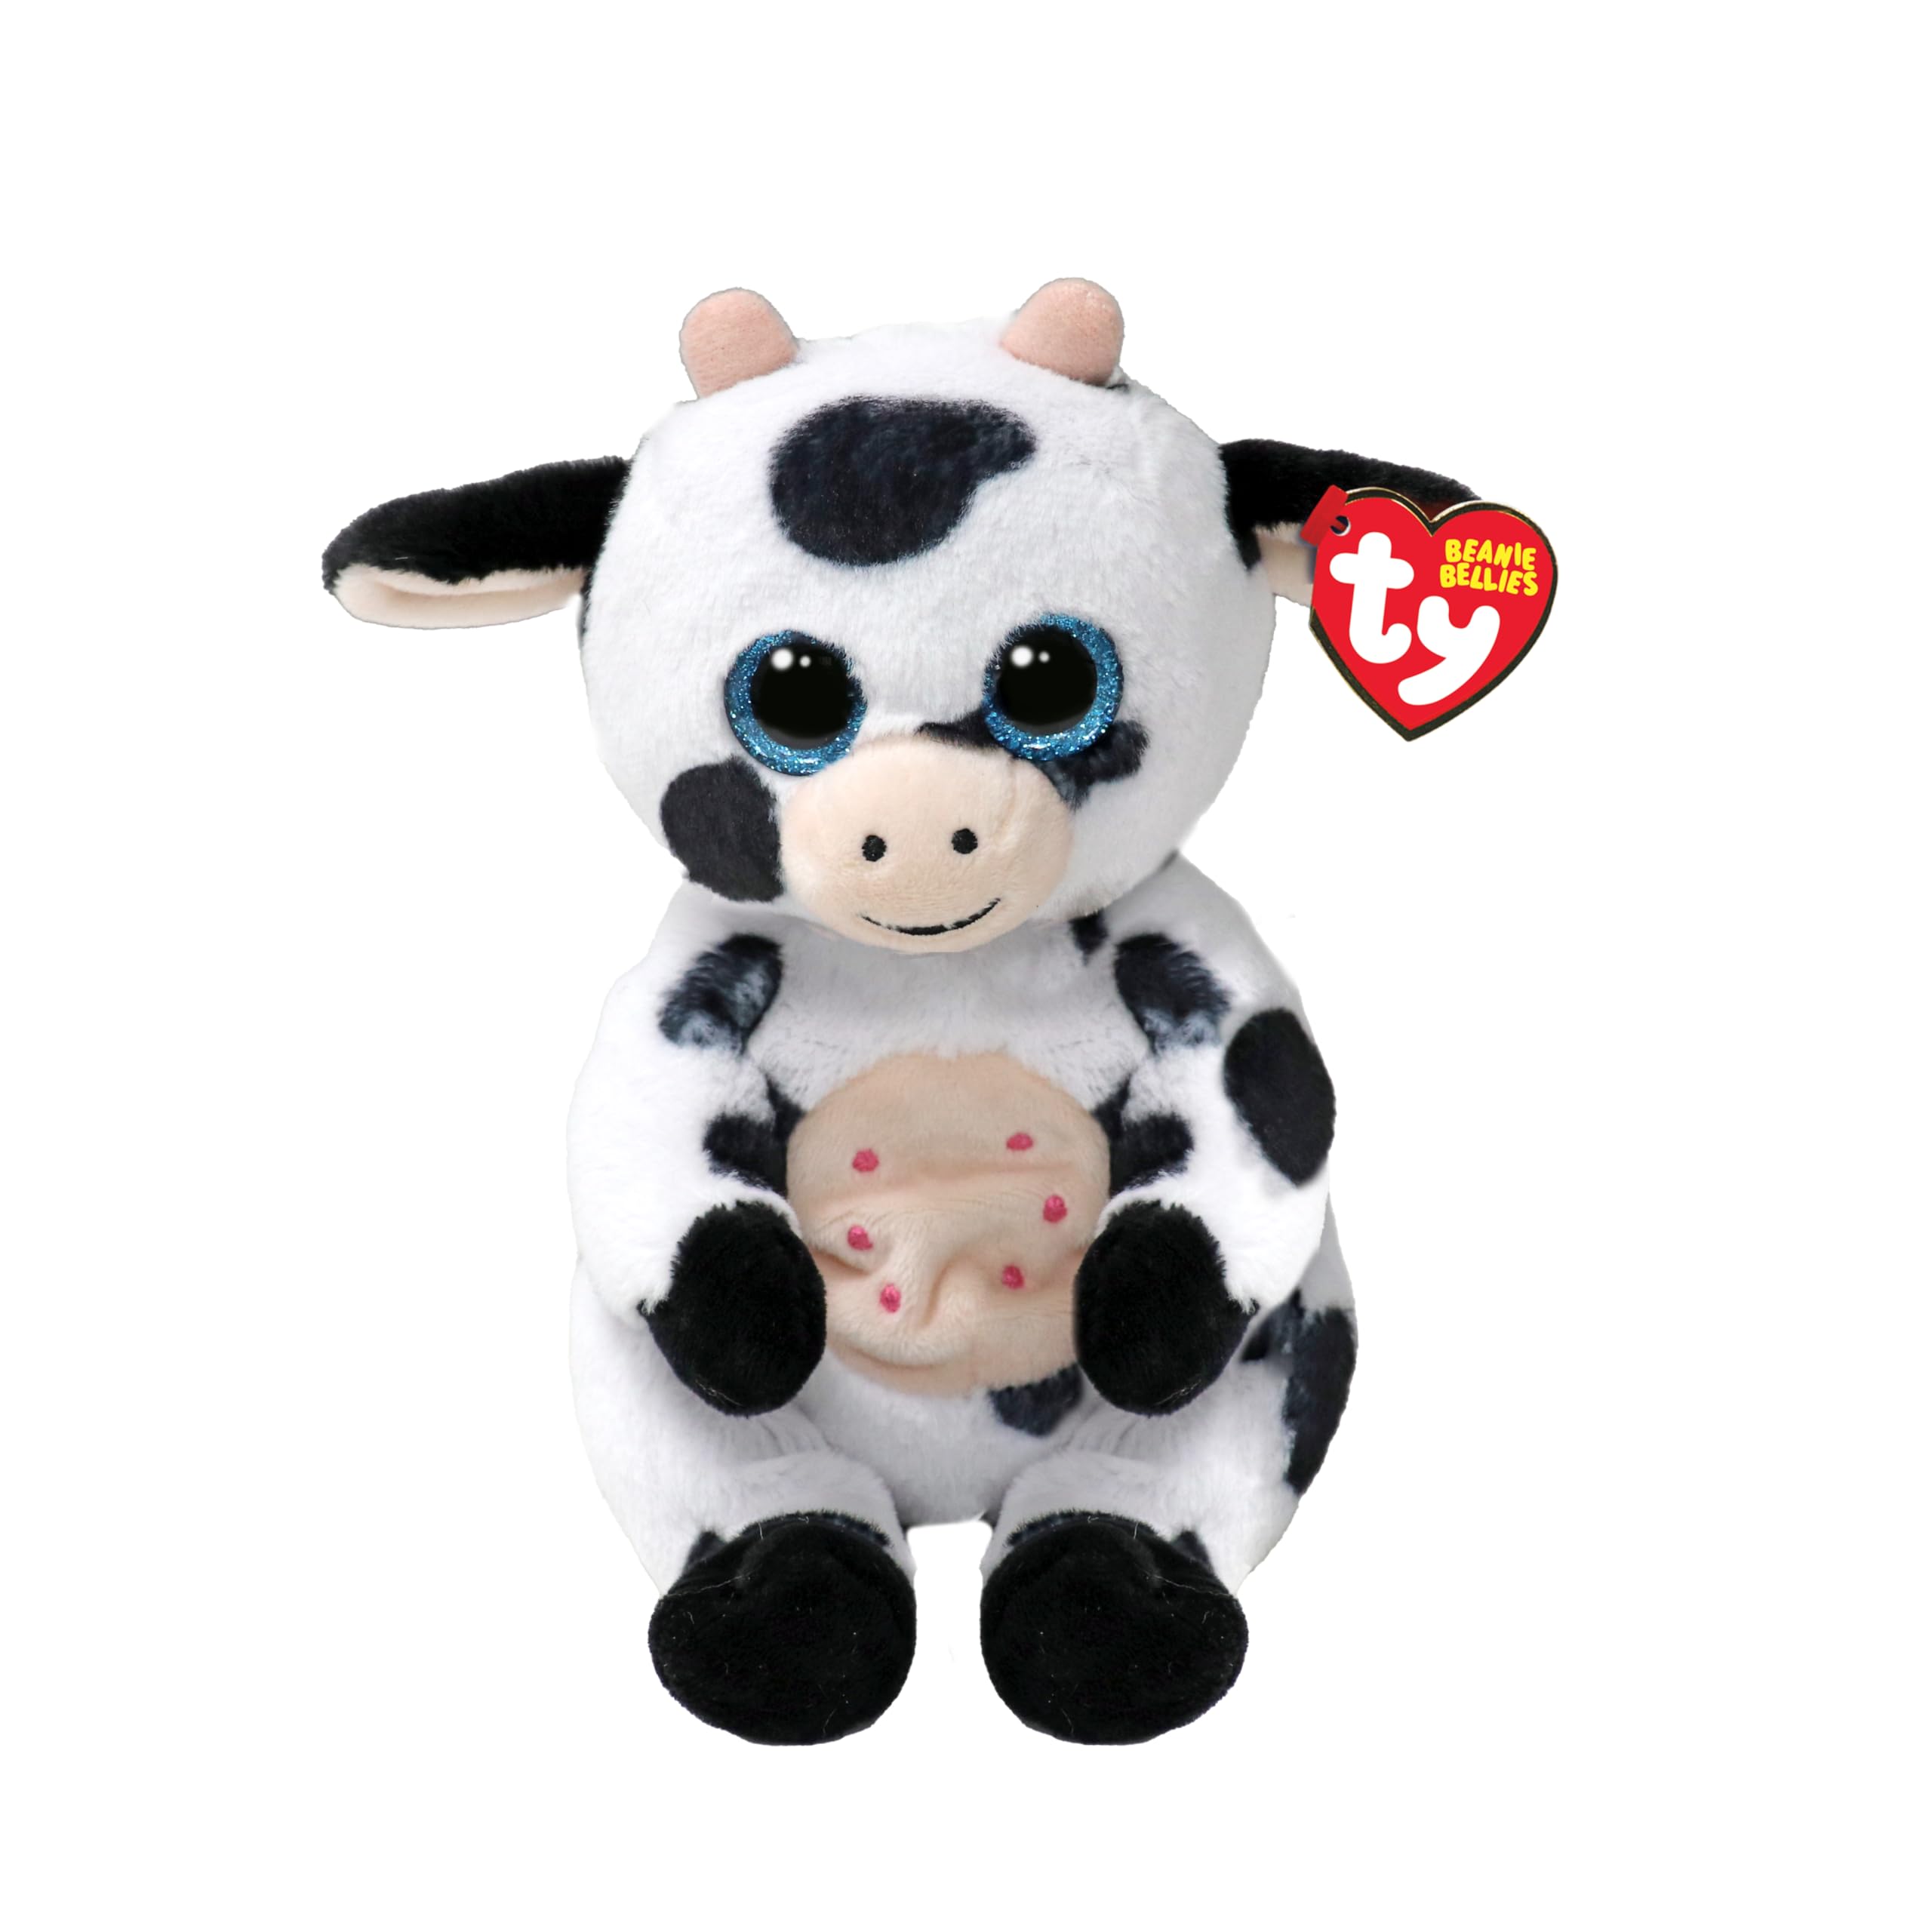 SPECIAL BEANIE BABIES 20CM HERDLY